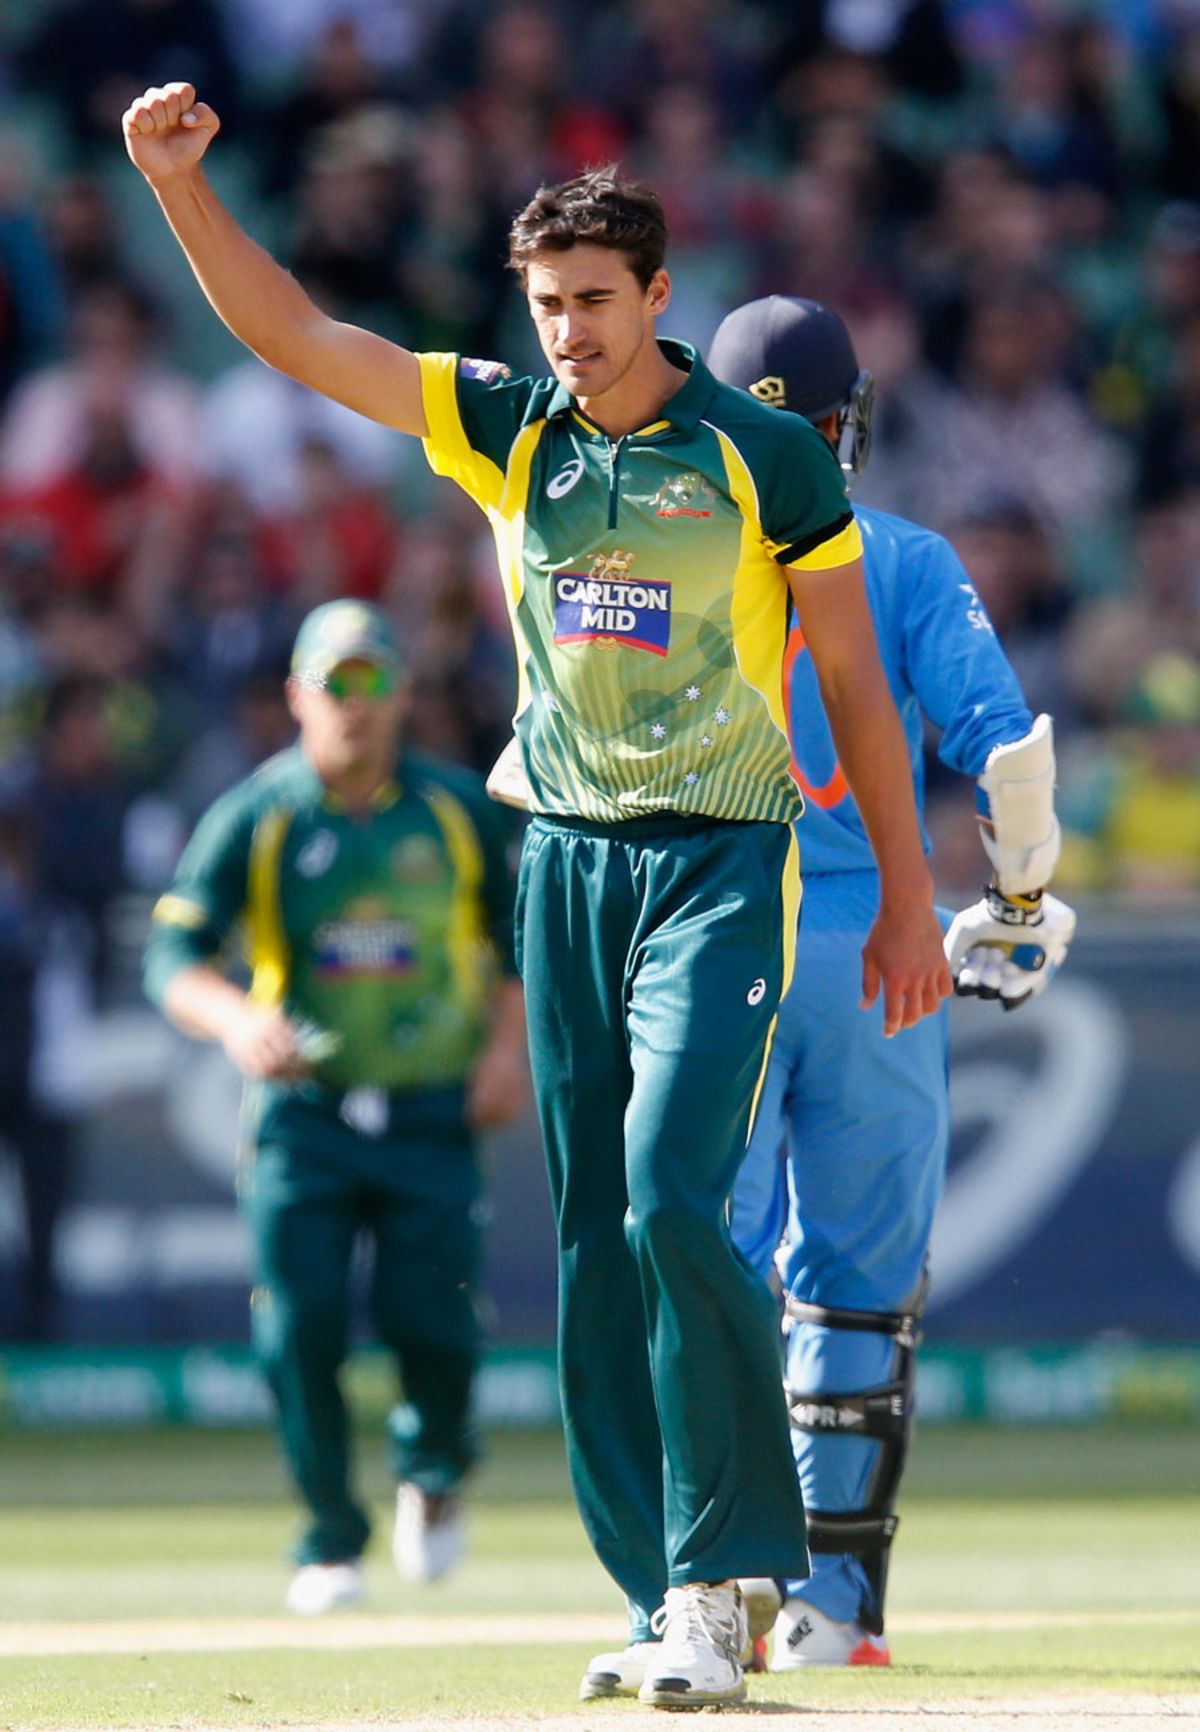 Mitchell Starc reined India in with late wickets, Australia v India, Carlton Mid Tri-series, Melbourne, January 18, 2015